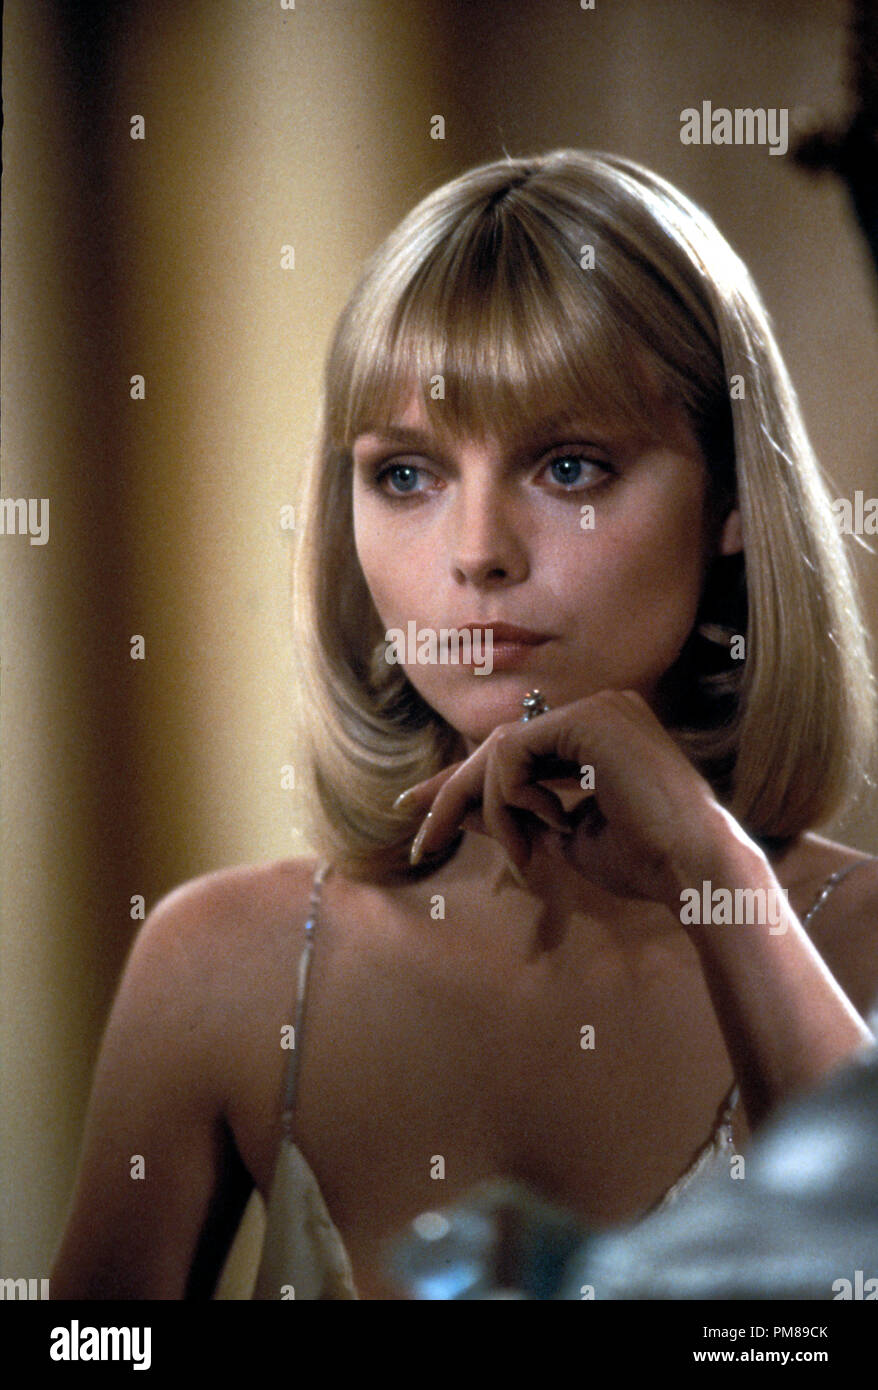 Studio Publicity Still from 'Scarface' Michelle Pfeiffer © 1983 Universal   All Rights Reserved   File Reference # 31708099THA  For Editorial Use Only Stock Photo